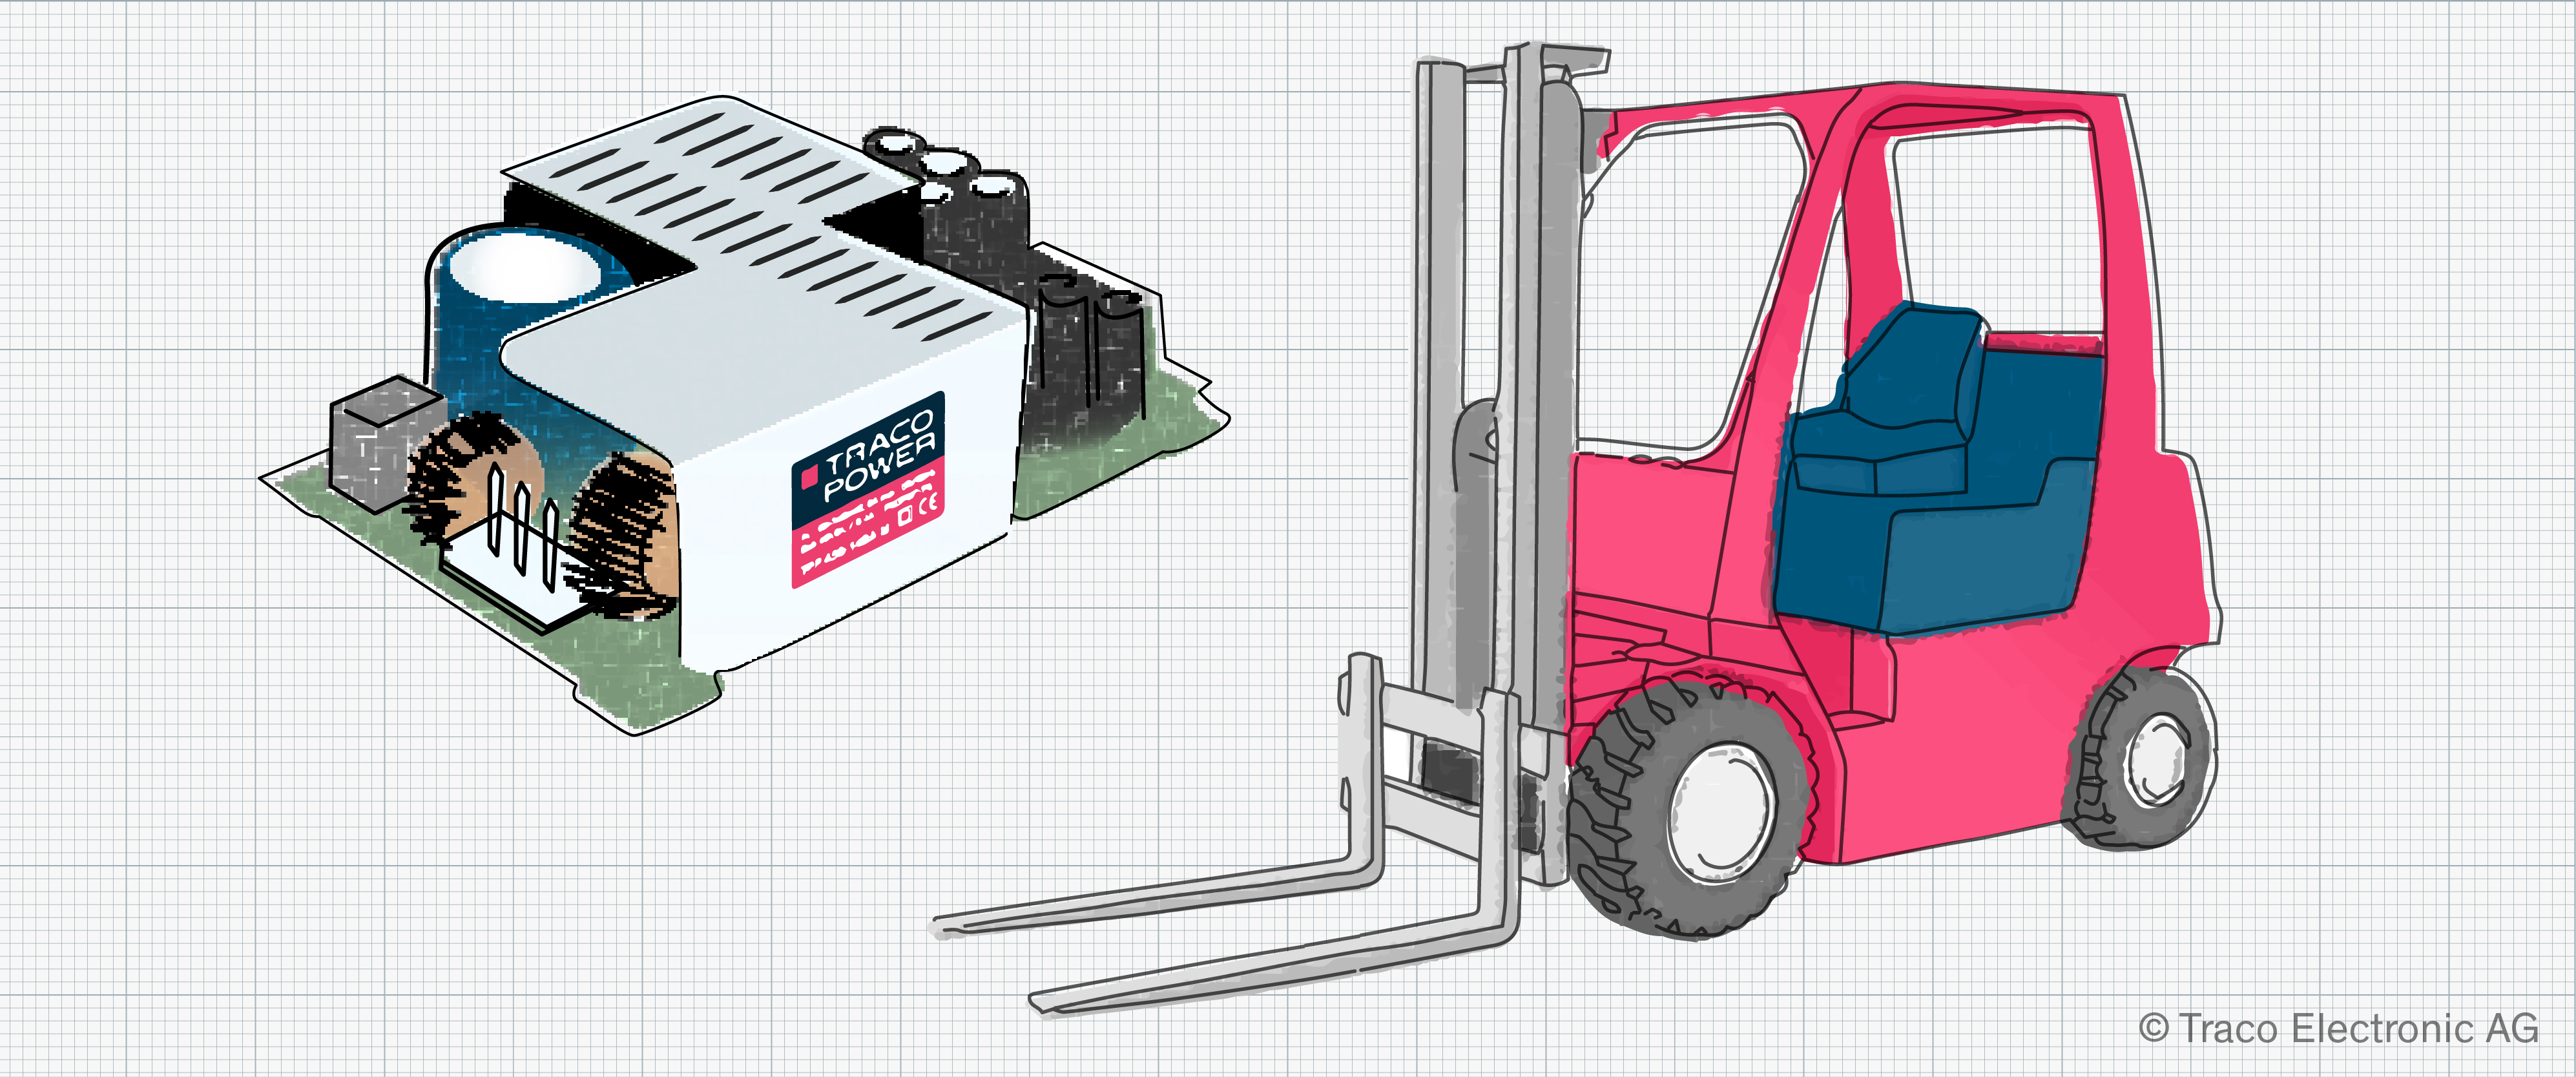 While an open-frame power supply may meet generic EMC standards, the precise requirements for a forklift application may differ, demanding additional certification. 